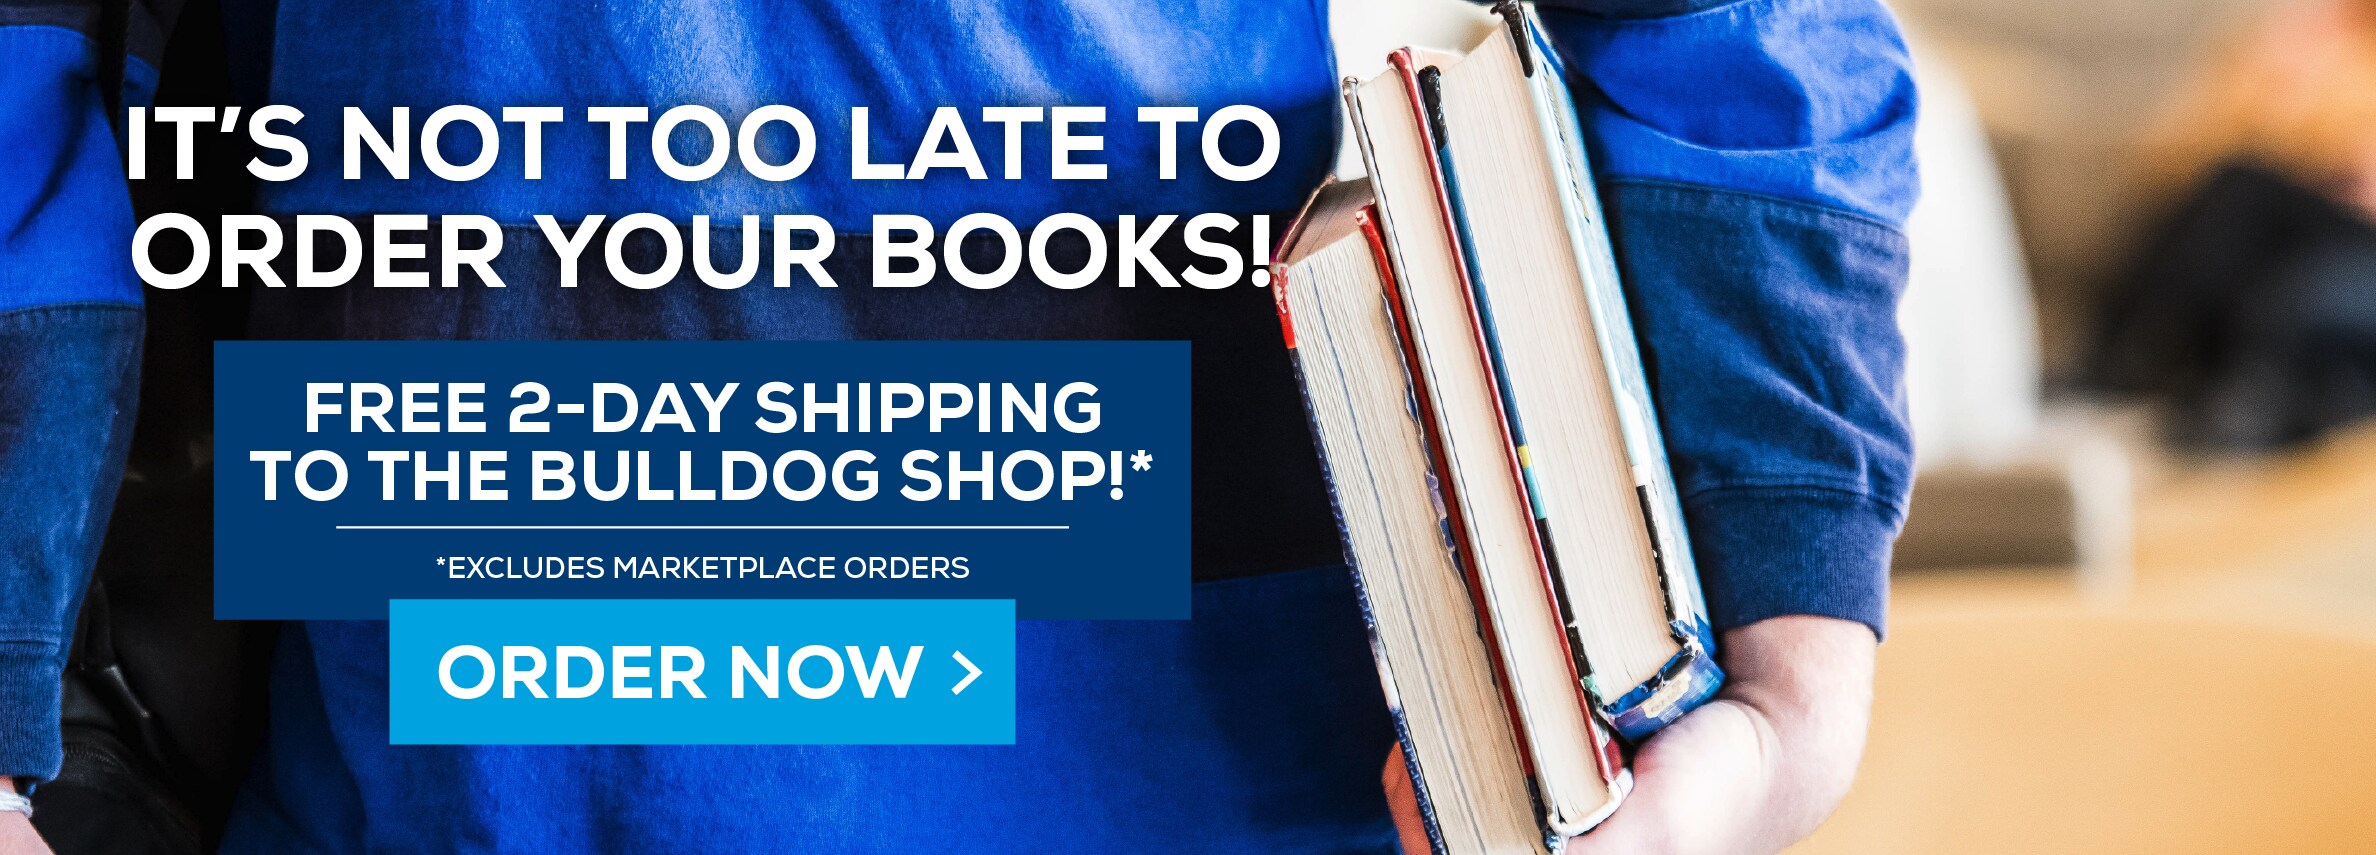 It's not too late to order your books! Free 2-day shipping to the Bulldog Shop!* *Excludes marketplace purchases. Order now.